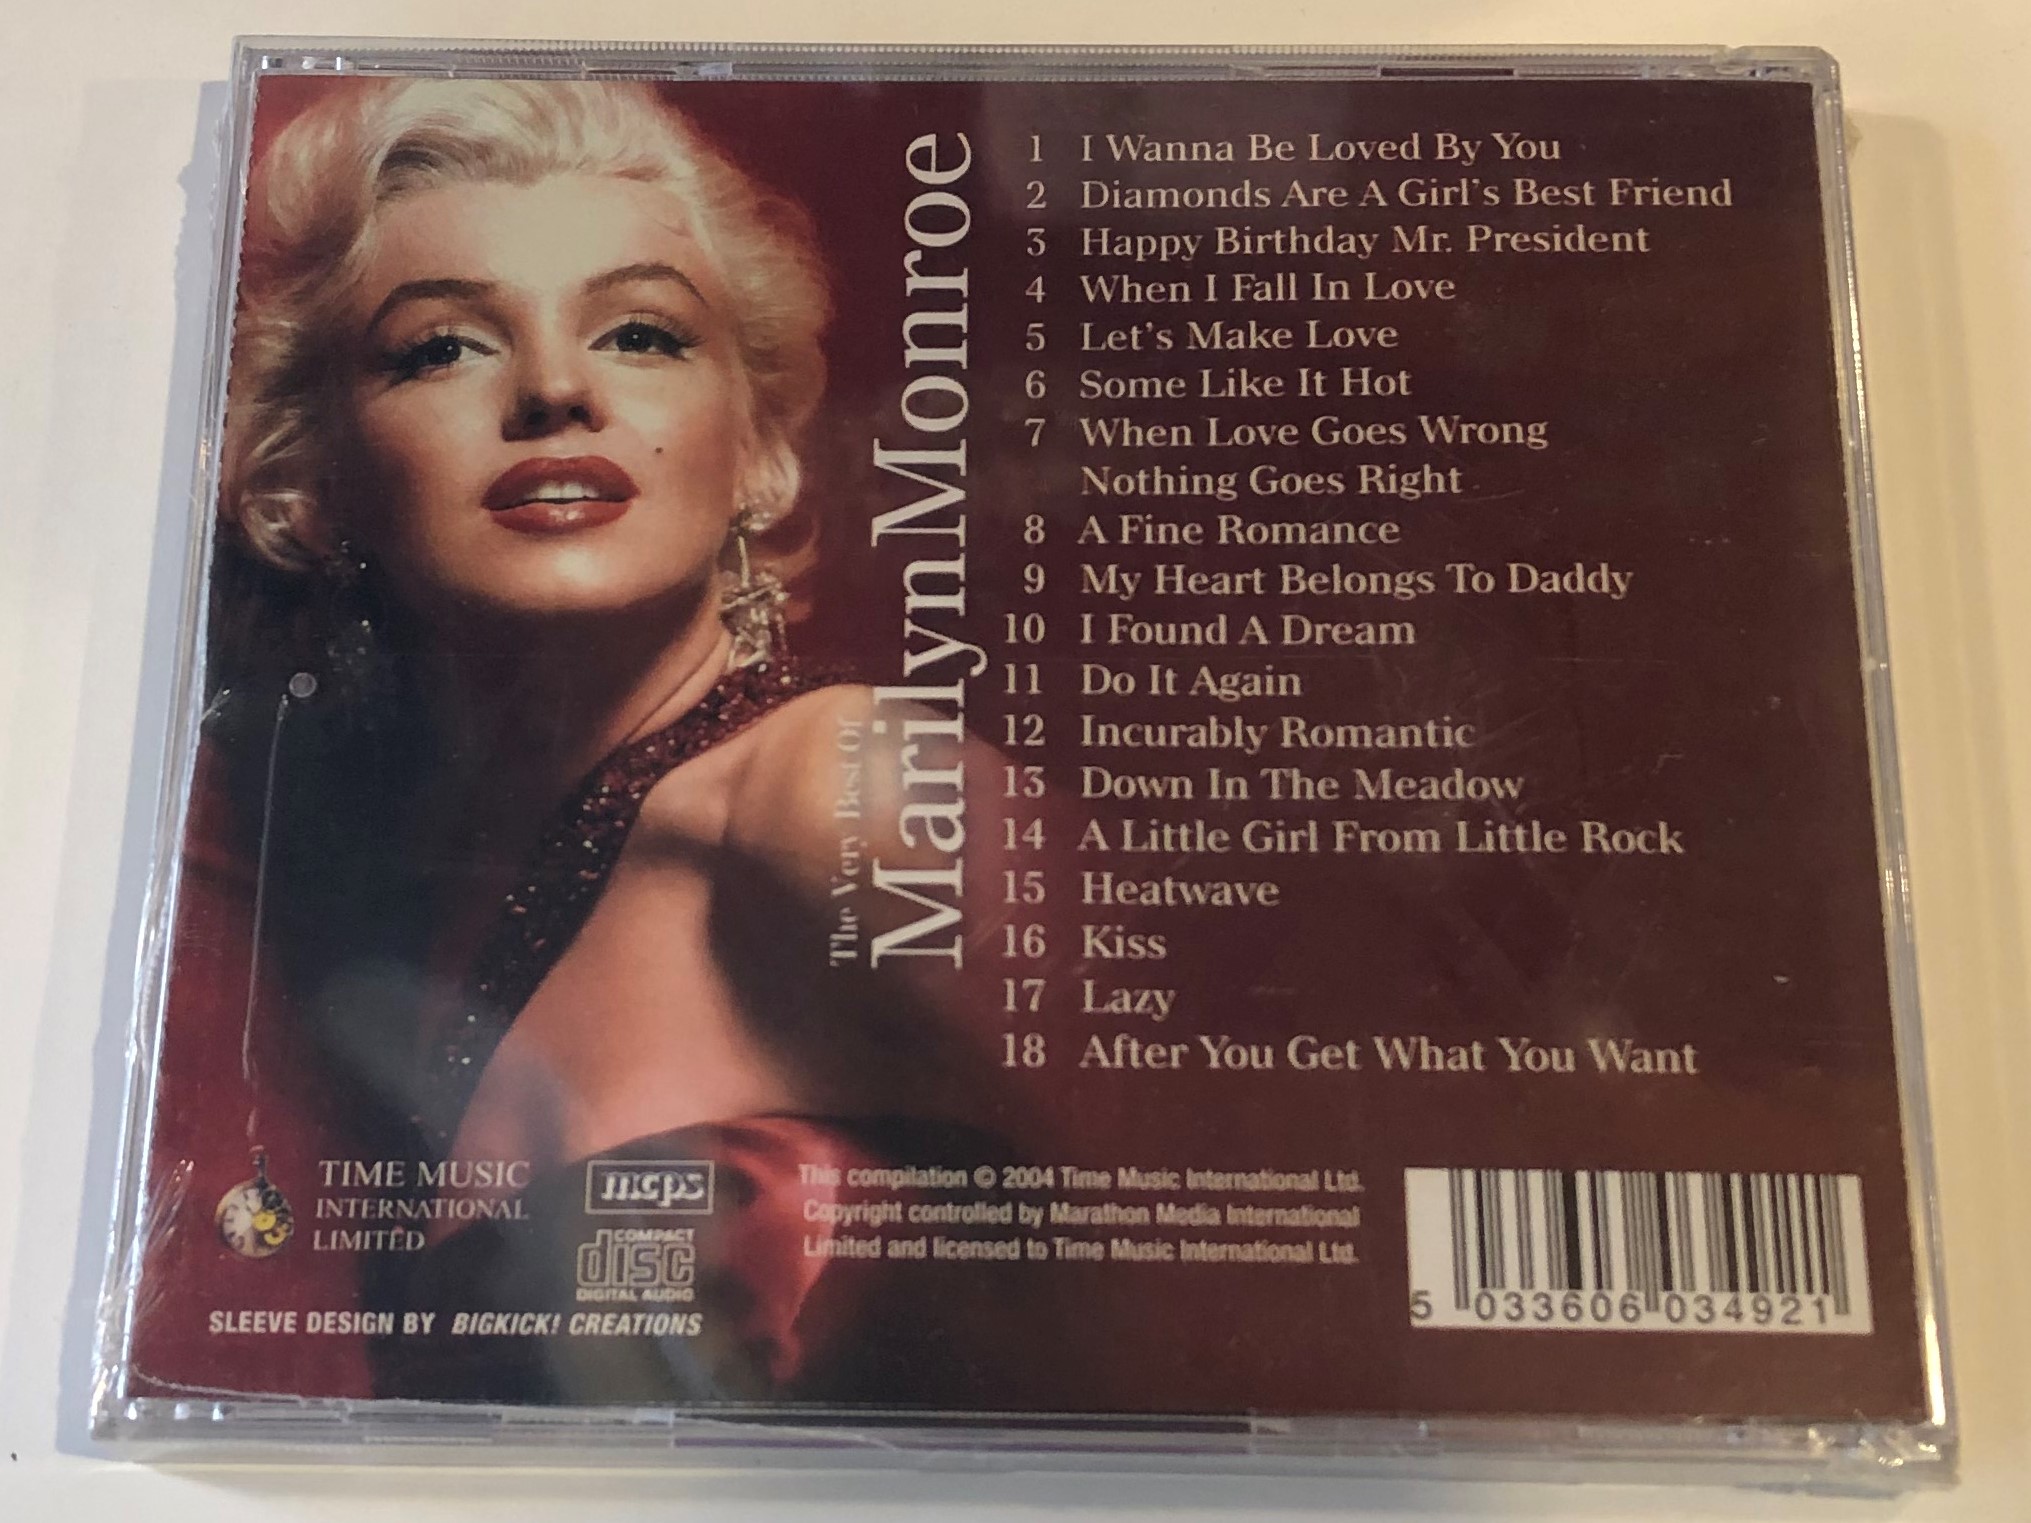 the-very-best-of-marilyn-monroe-i-wanna-be-loved-by-you-diamonds-are-a-girl-s-best-friend-happy-birthday-mr.-president-some-like-it-hot-time-music-international-ltd.-audio-cd-2004-50336060.jpg